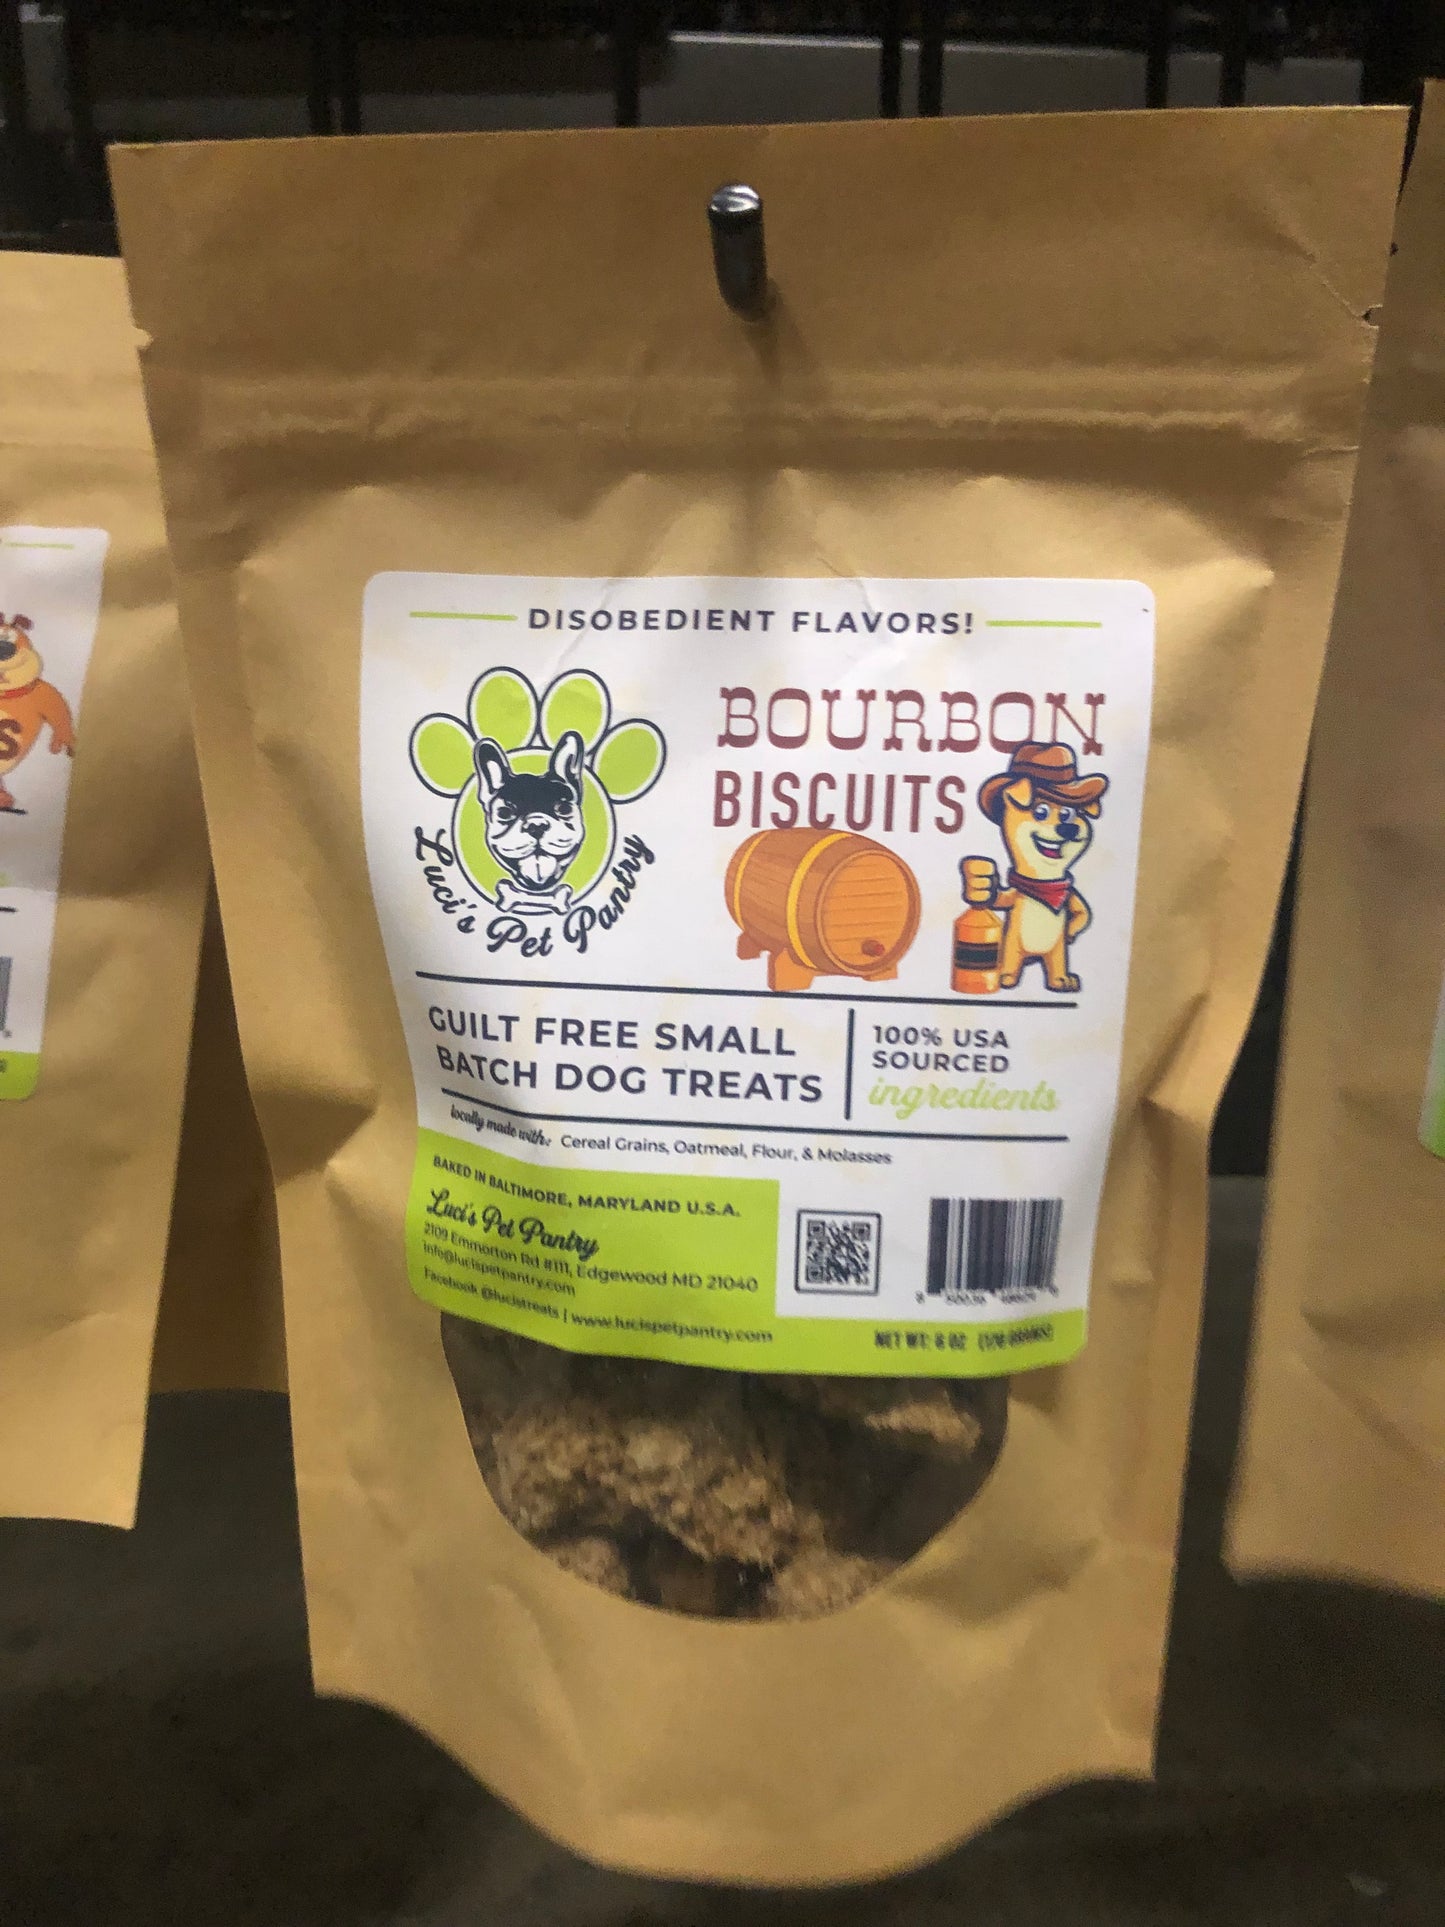 Wine Biscuits - All Natural "Cheese & Crackers" Dog & Puppy Treats - Disobedient Biscuits 6 oz. Pouch